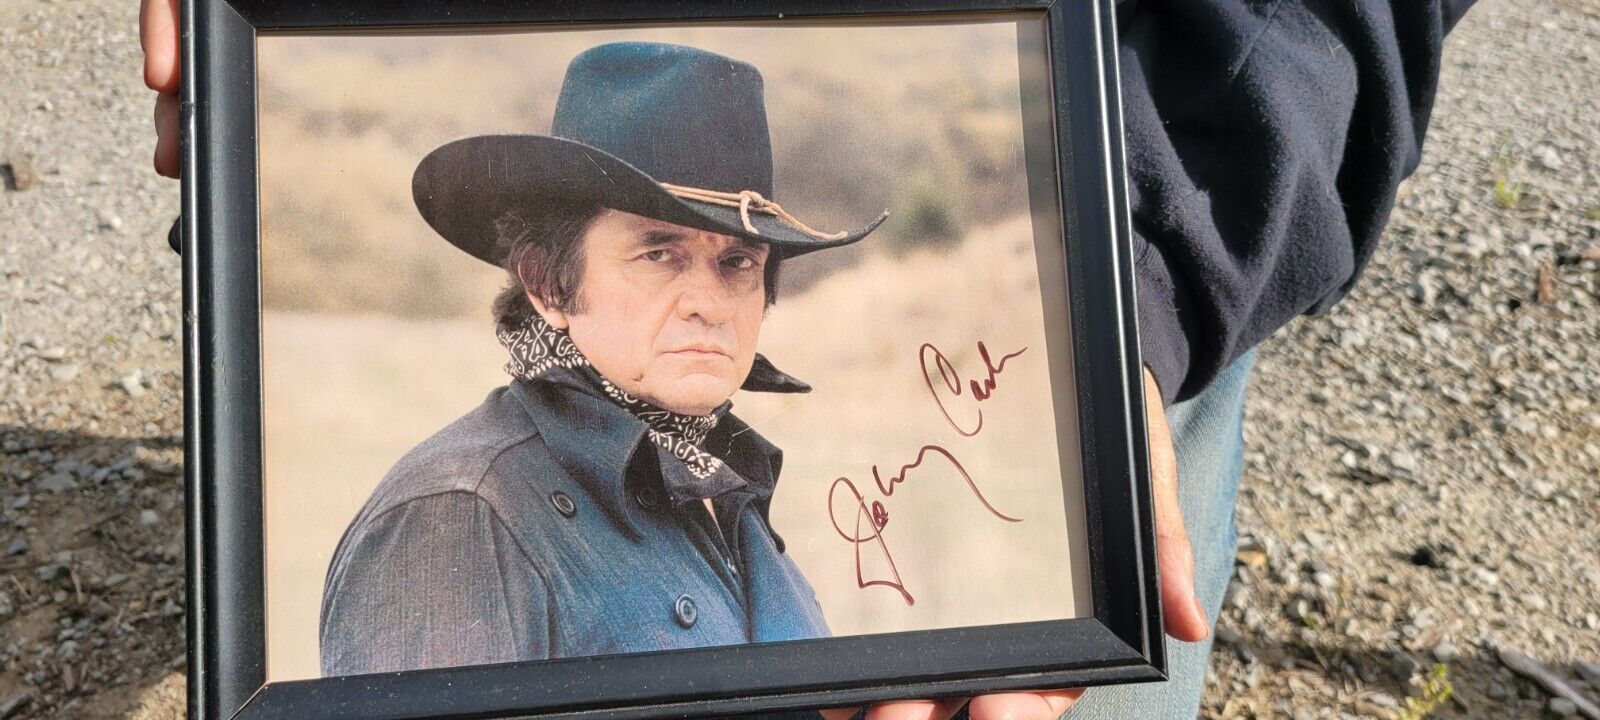 JOHNNY CASH HAND SIGNED  8X10 Matte Photo GUARANTEED AUTHENTIC